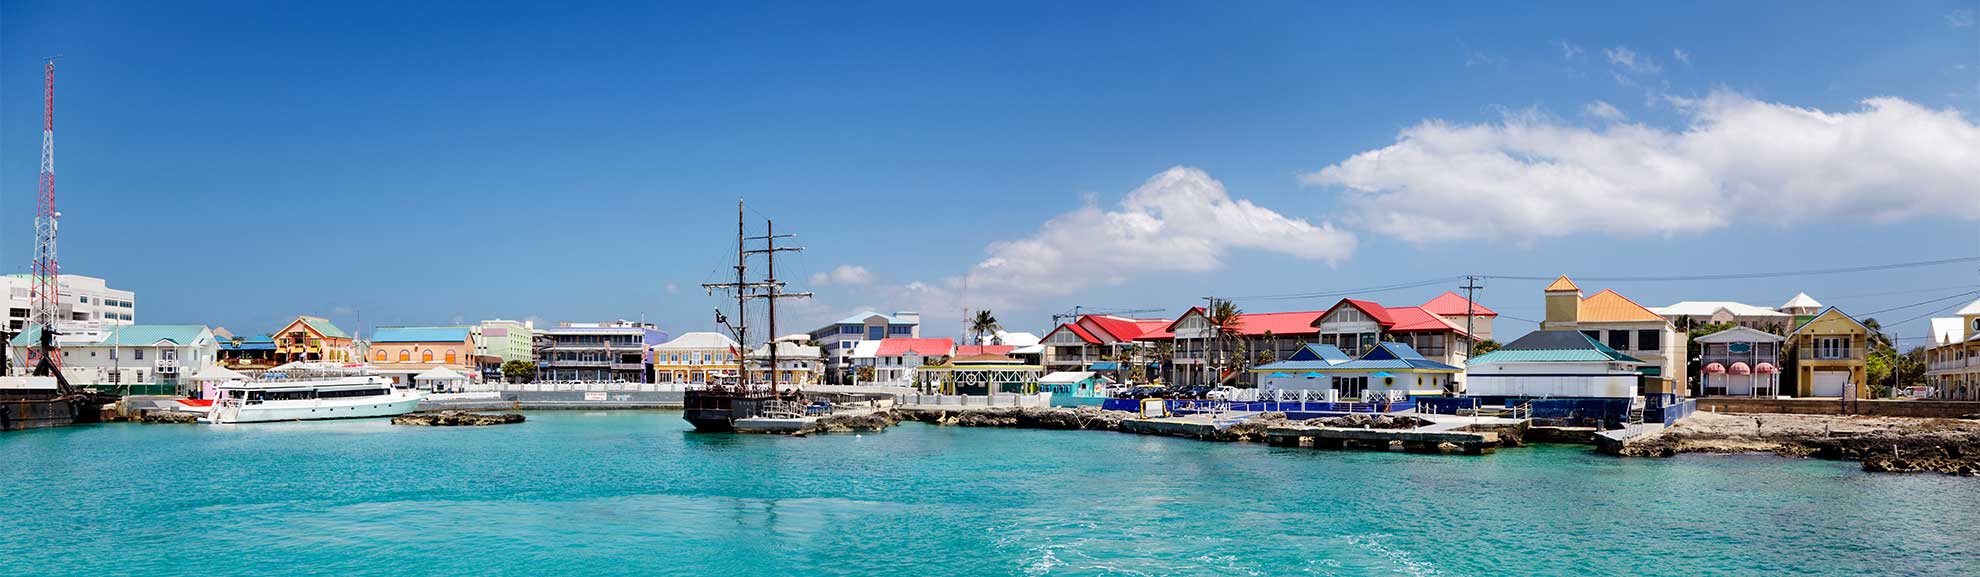 George Town Harbour, Grand Cayman